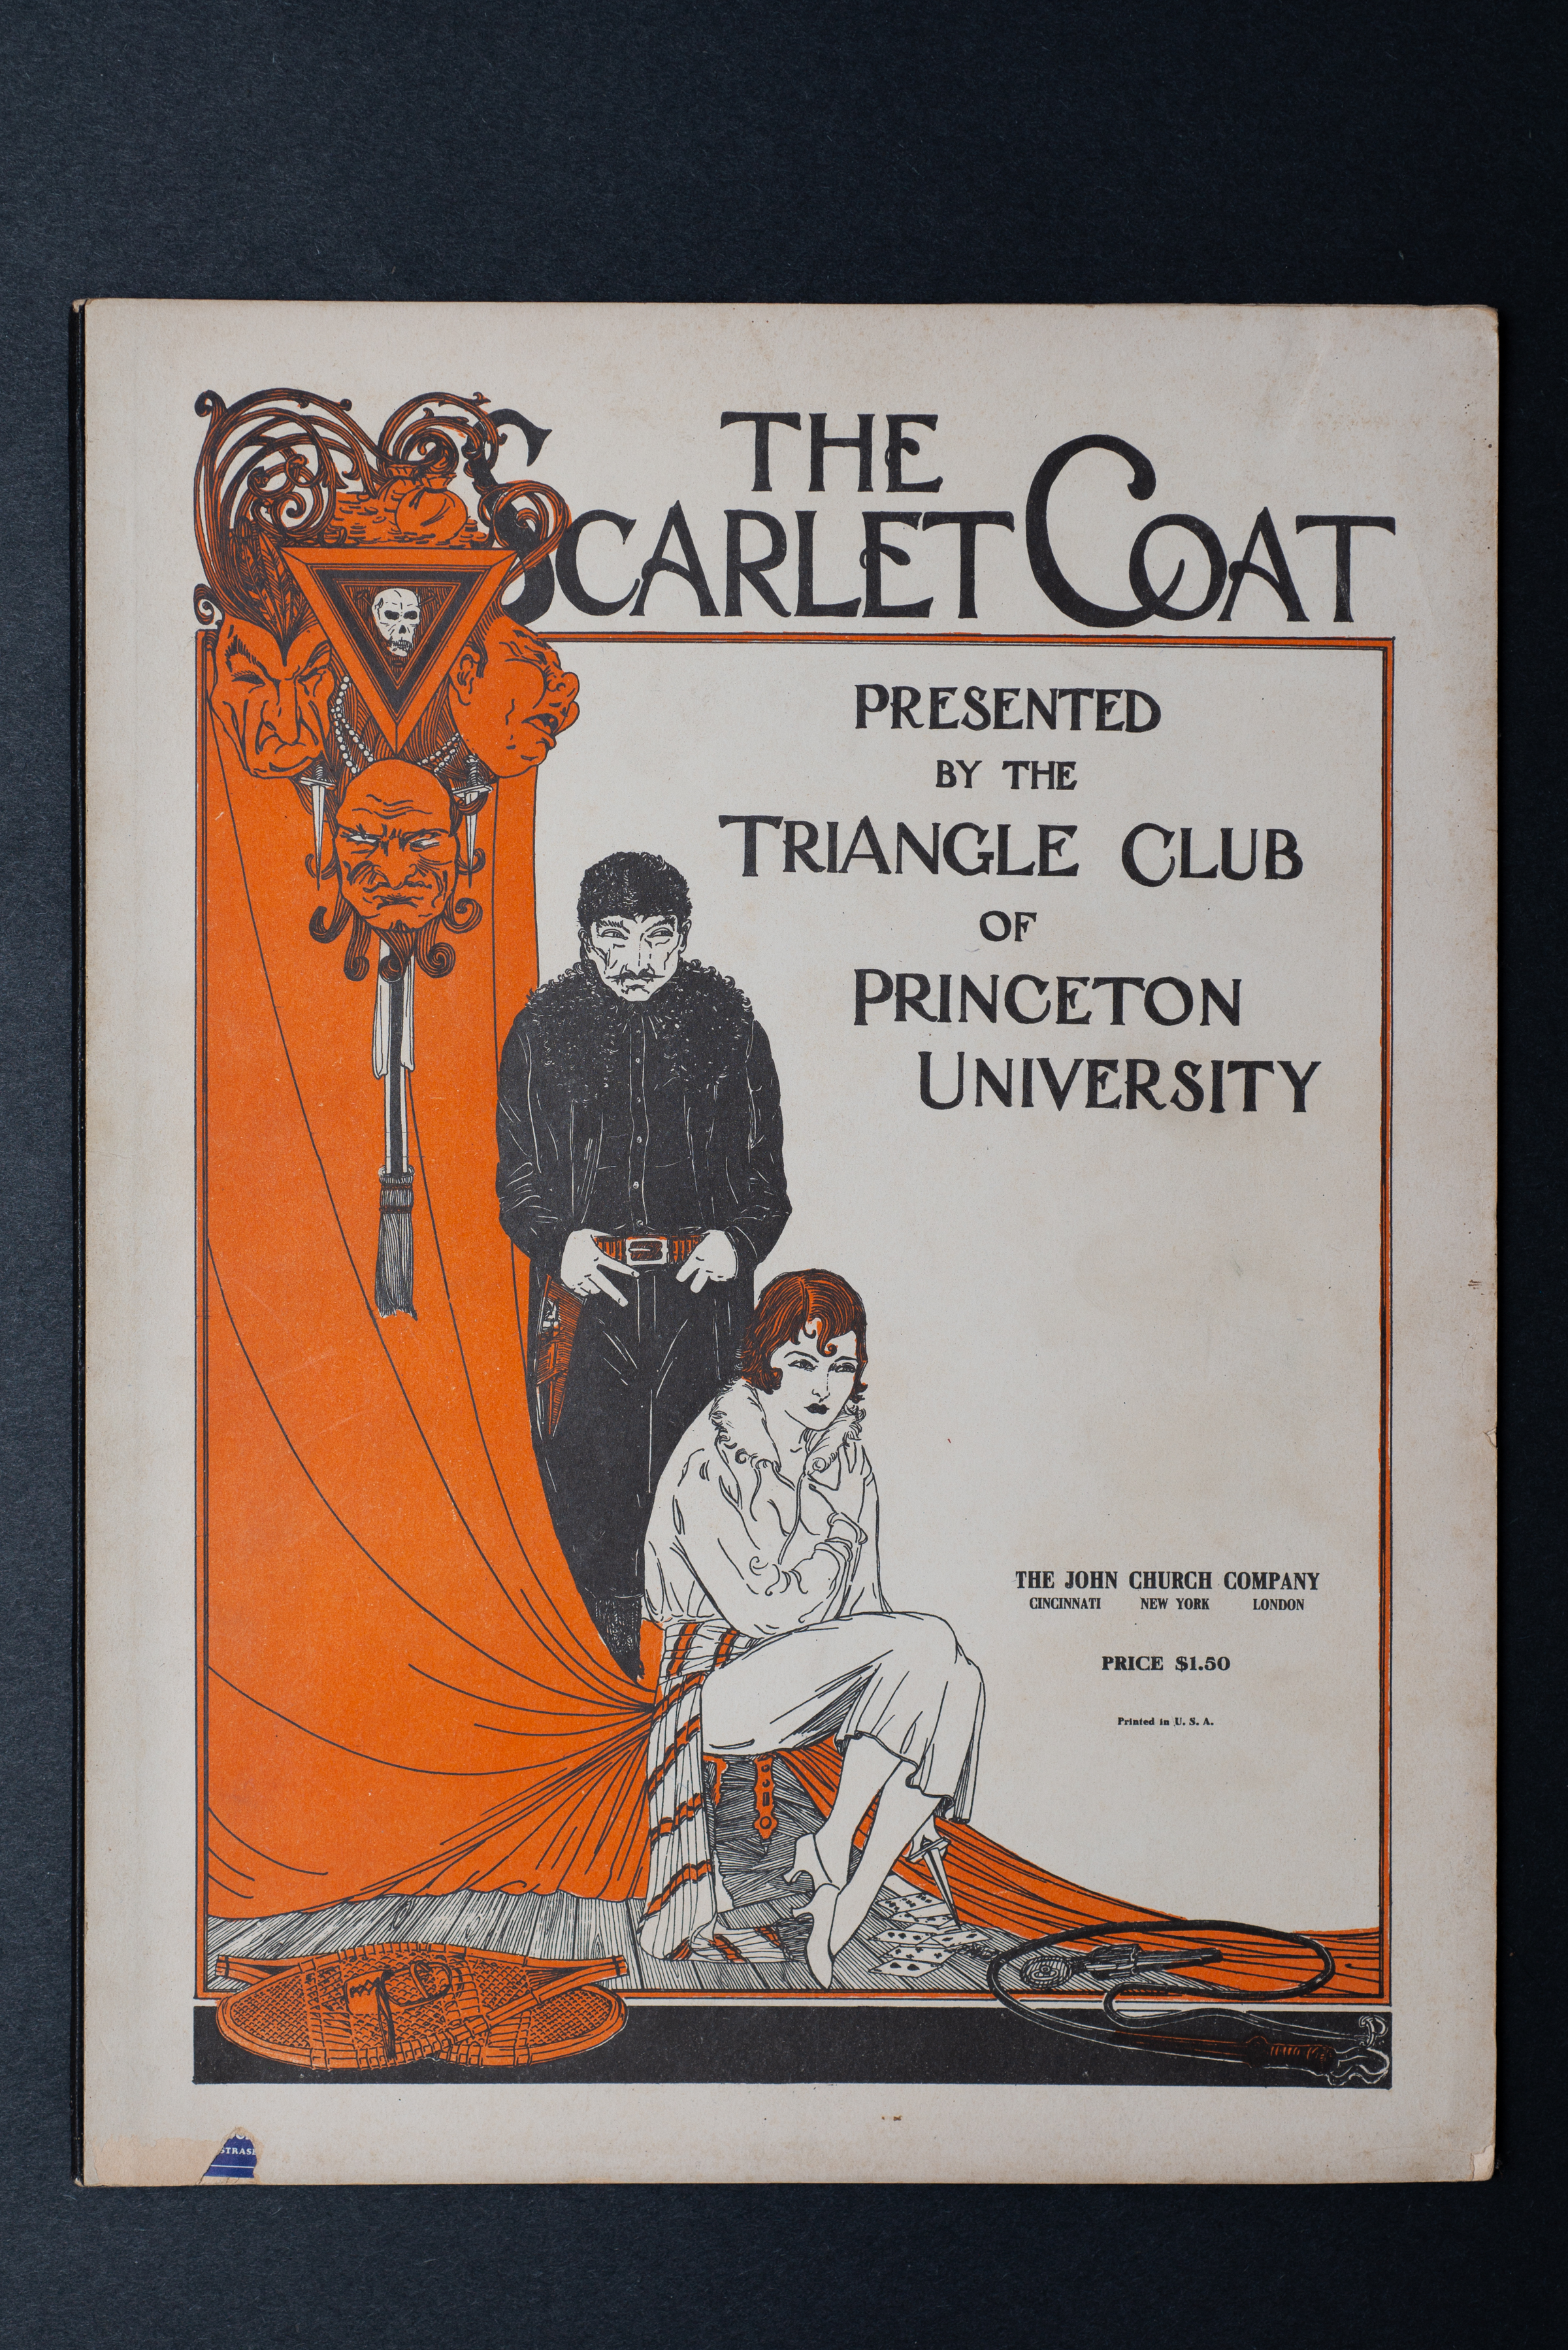 The Scarlet Coat Musical Score